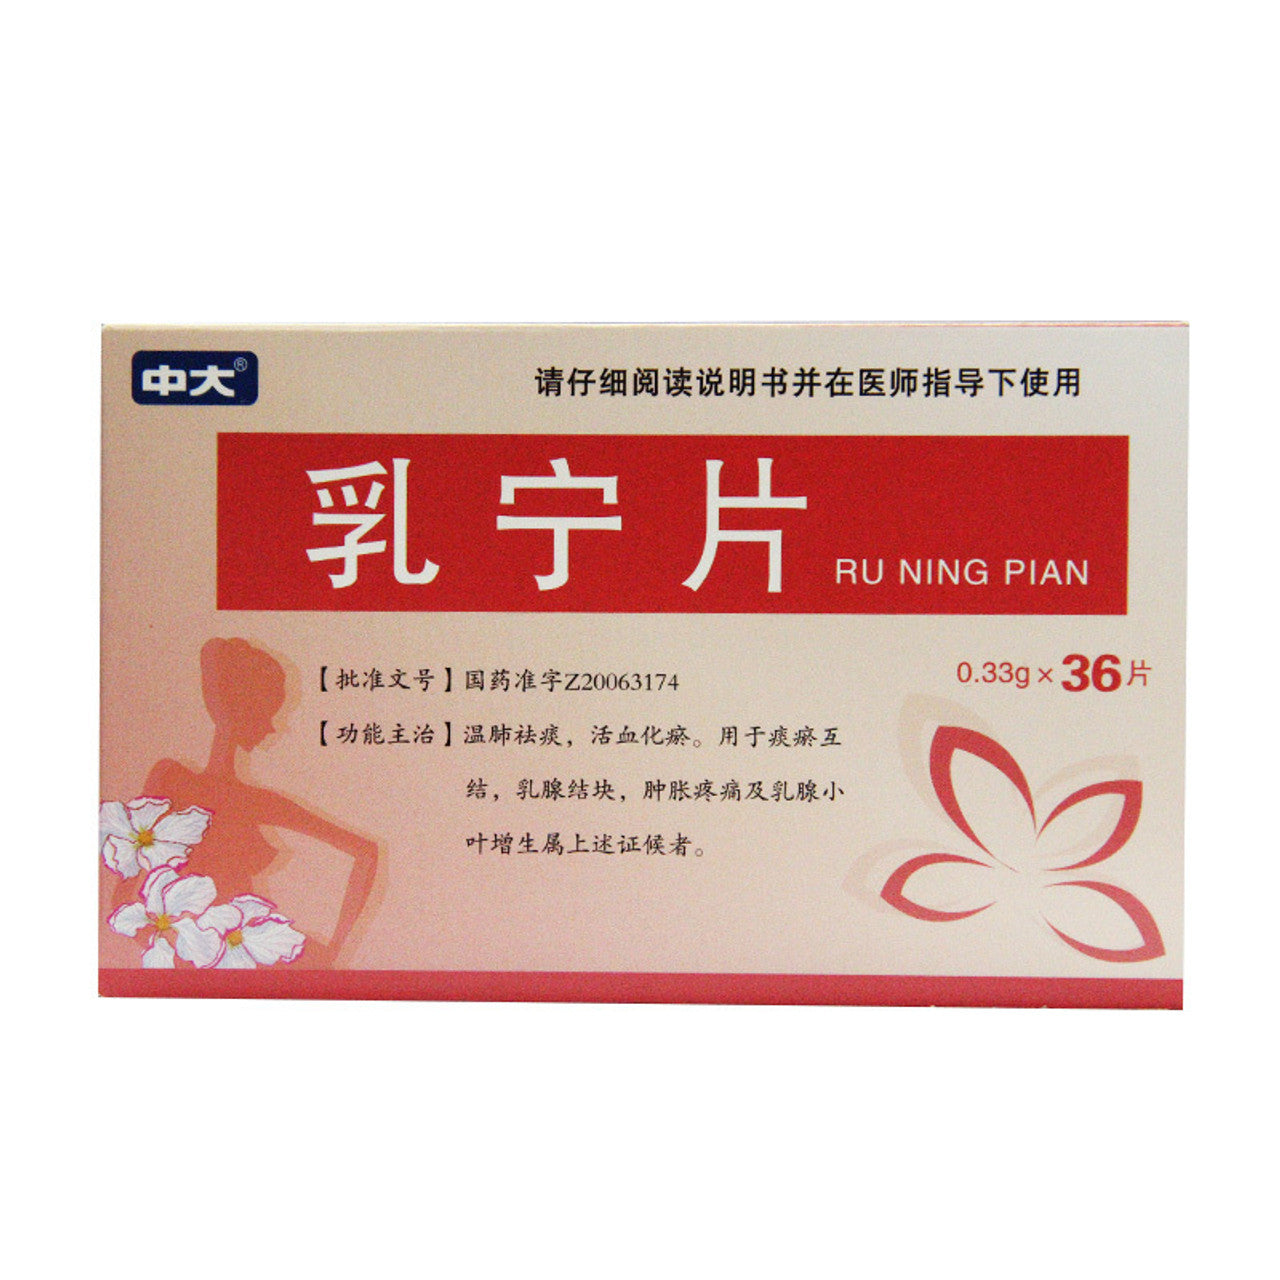 China Herb. Runing Pian or Runing Tablets for phlegm and blood stasis, breast agglomeration, swelling and pain, and breast lobular hyperplasia.. Ru Ning Pian.